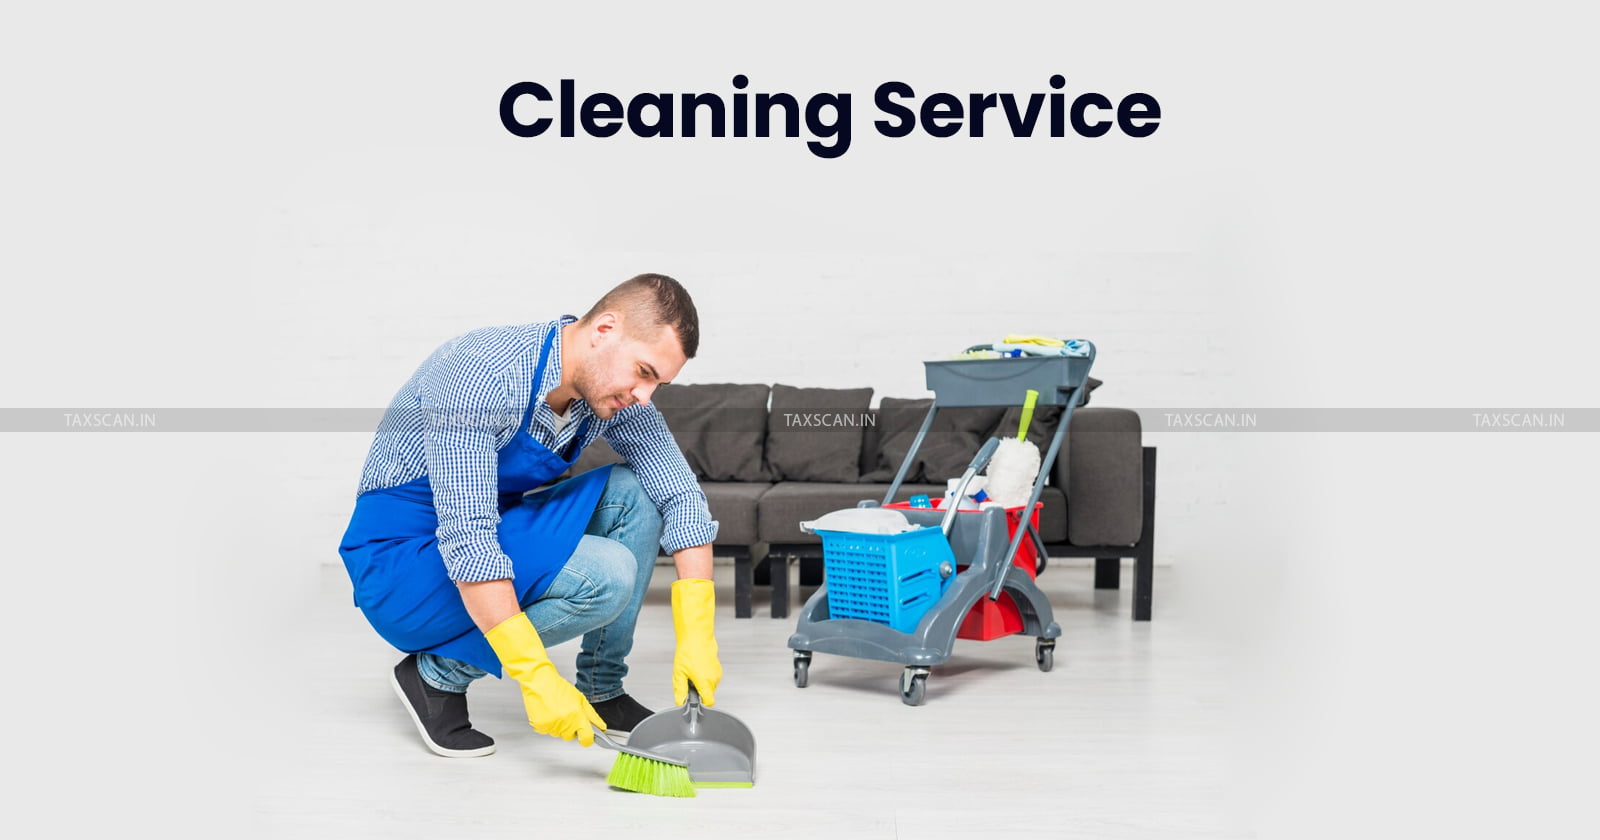 Activities of Management service - Housekeeping Falls -Cleaning Service-Manpower Supply- Services-CESTAT-TAXSCAN